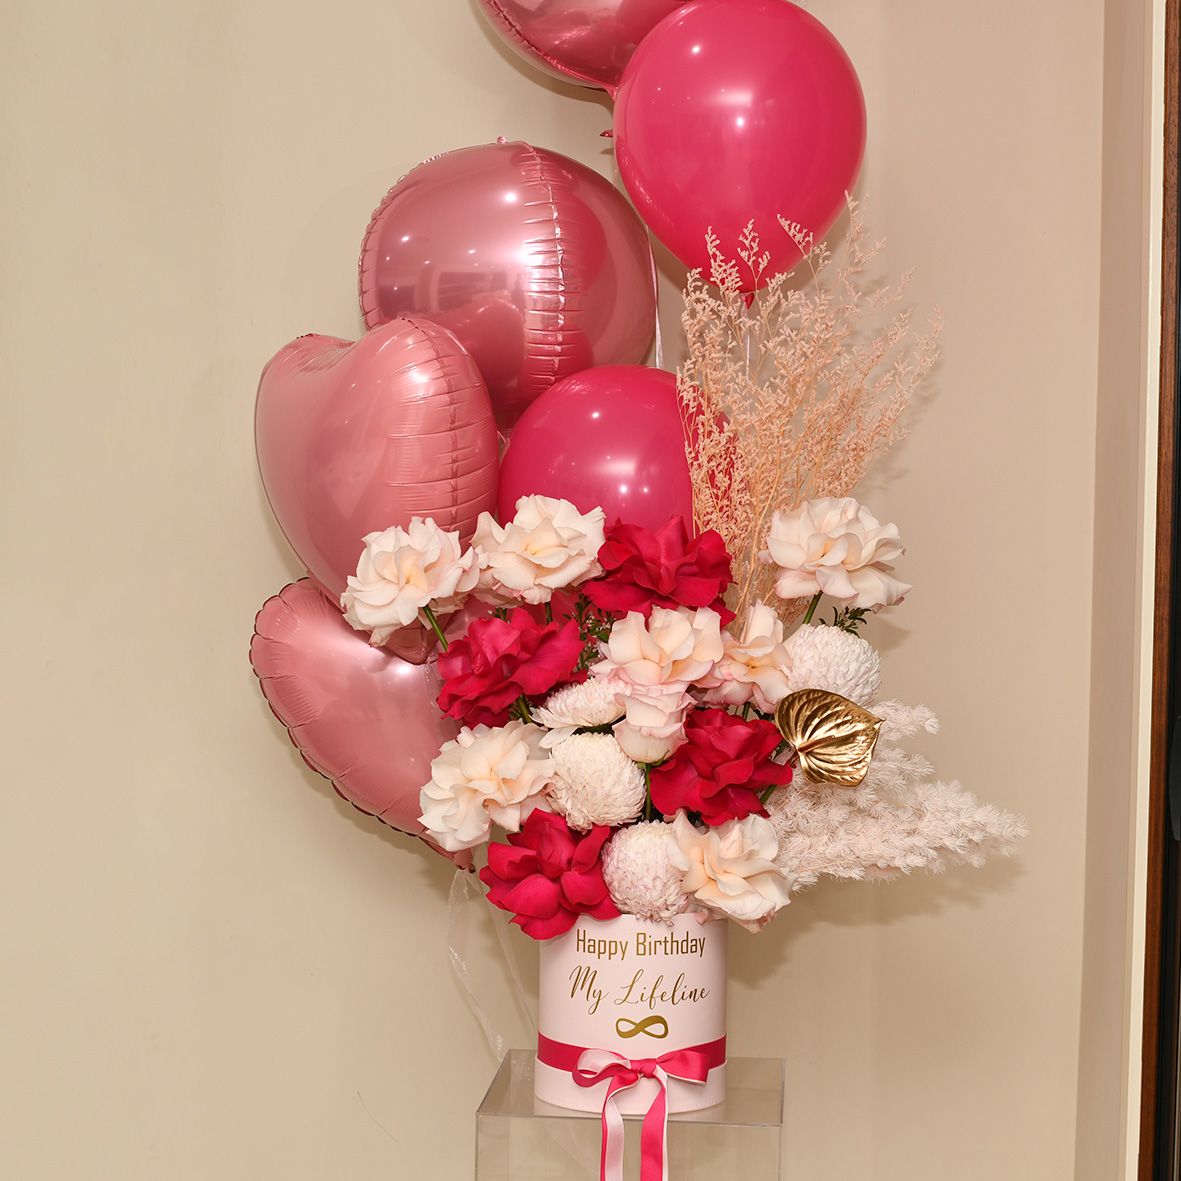 Balloon and Flower Delivery Sydney - Personalised Gift